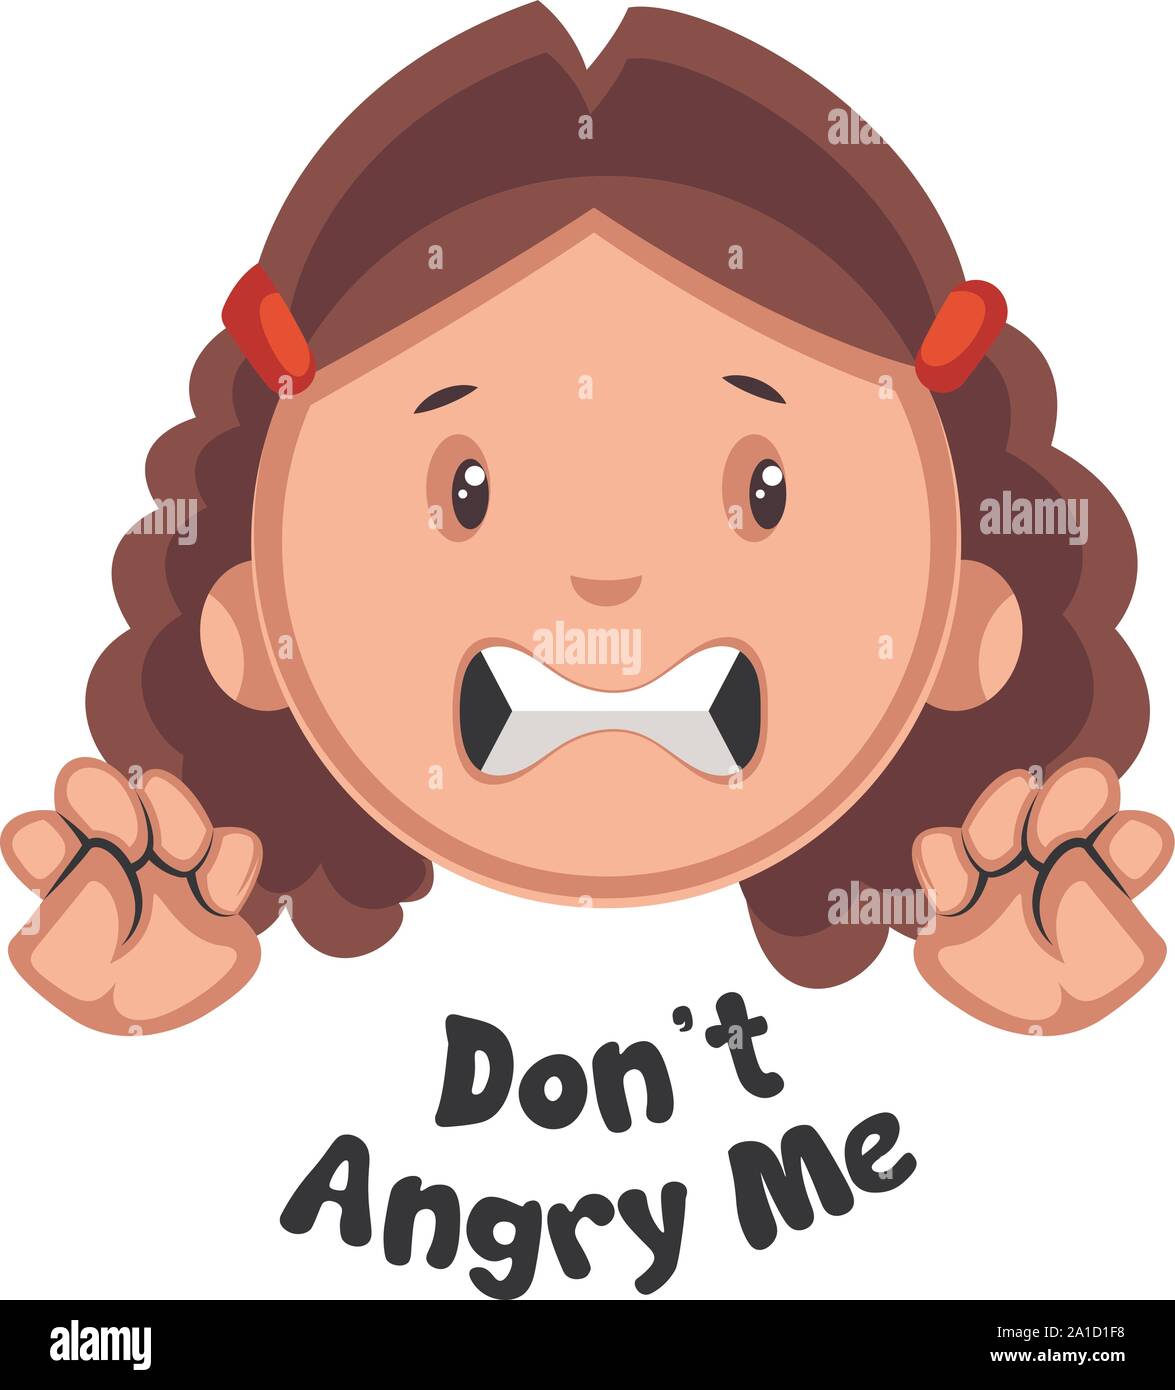 Dont angry me girl emoji, illustration, vector on white background. Stock Vector